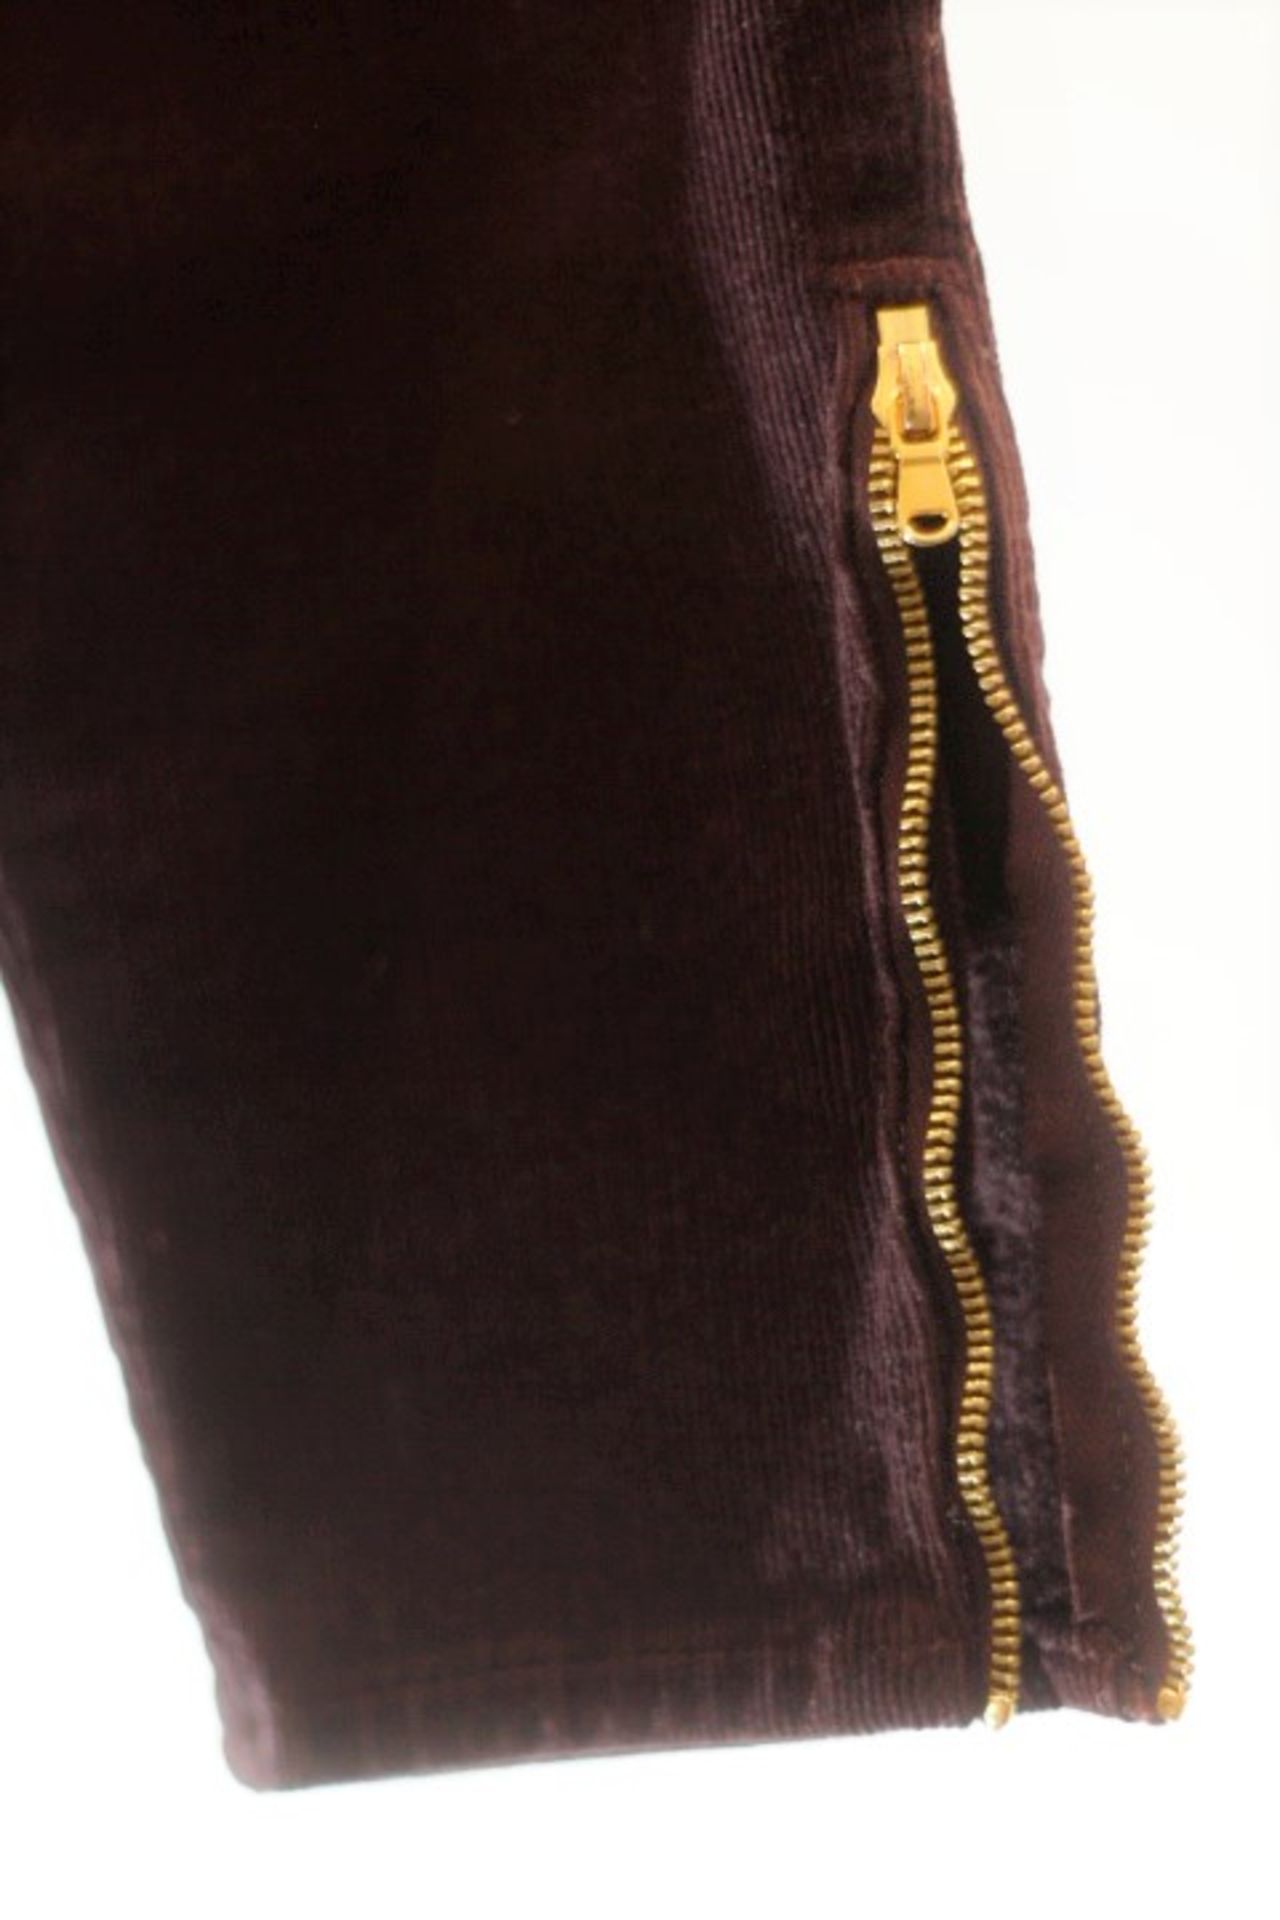 1 x J Brand Blackberry Corduroy Jeans - Size: 8 - Material: 56% Cotton, 37% Modal, 6% Polyester, - Image 3 of 6